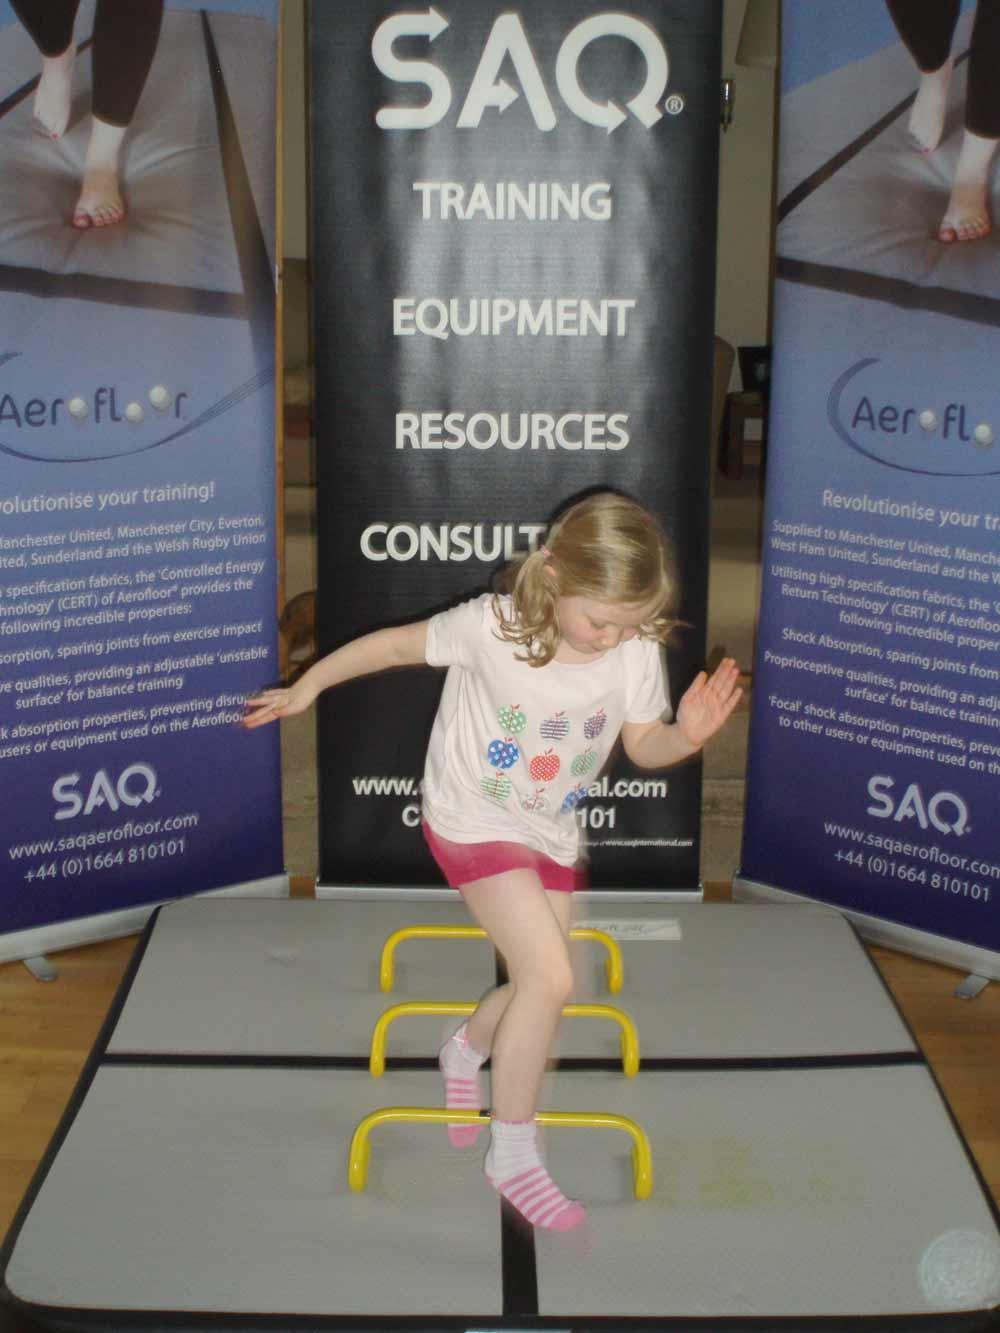 SAQ offers an air-filled functional training mat suitable for use by children